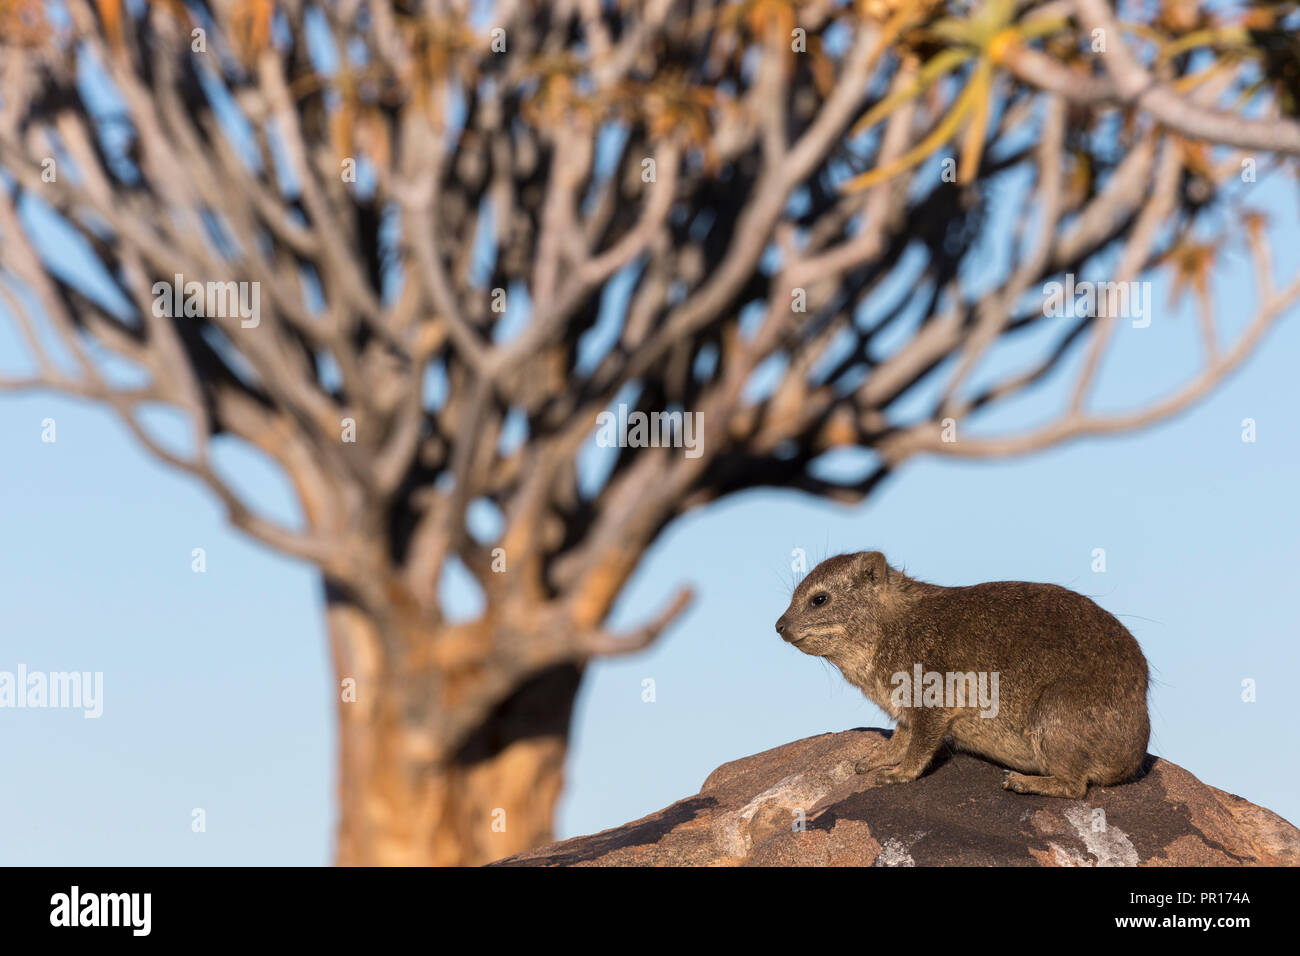 Rock hyrax (Procavia capensis), Quiver Tree Forest, Keetmanshoop, Namibia, Africa Stock Photo